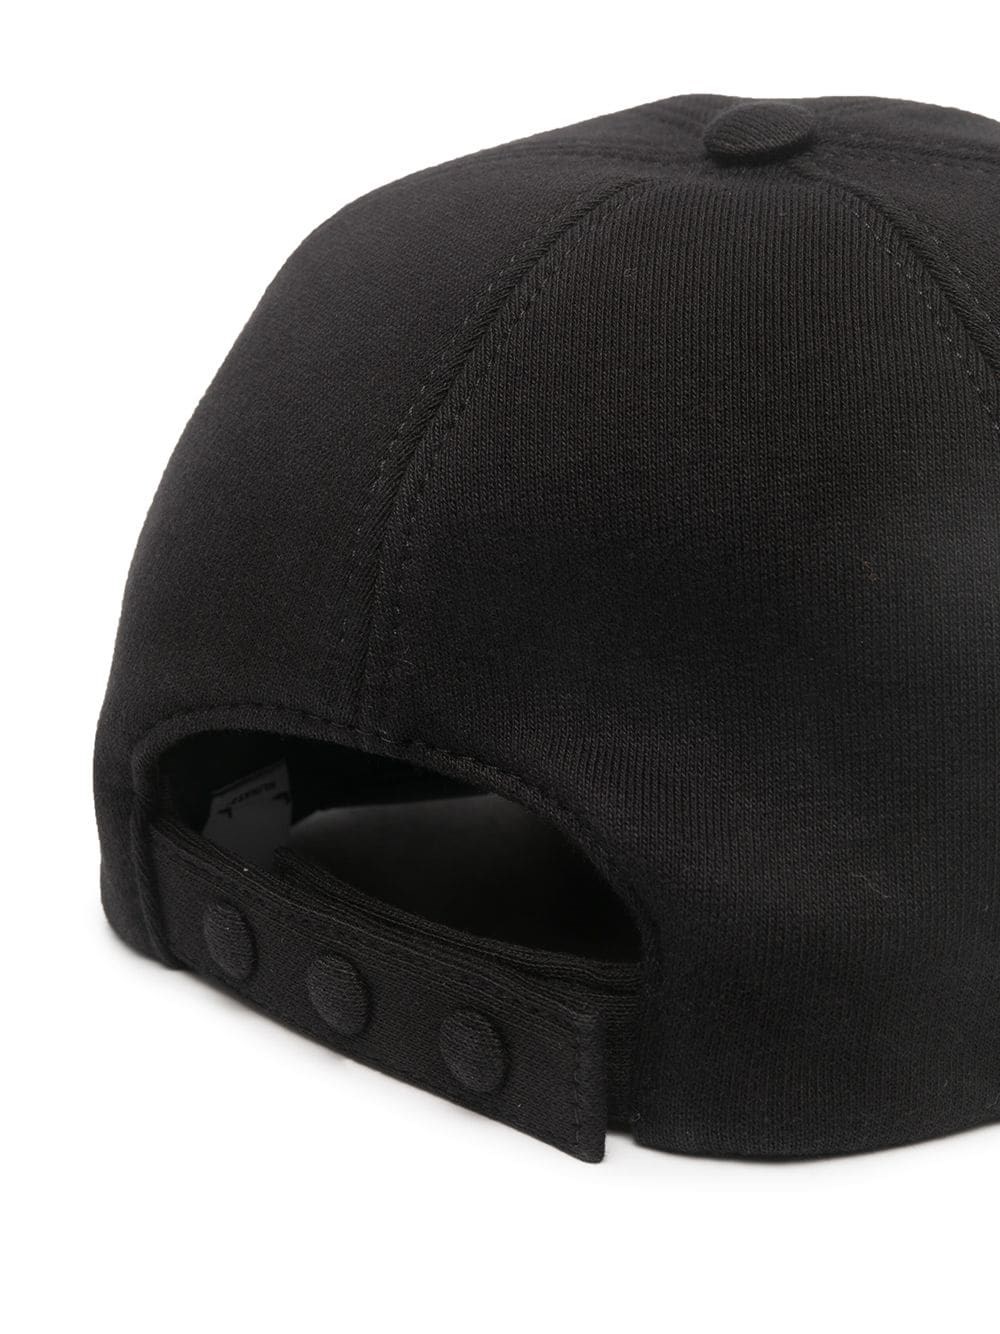 burberry BASEBALL CAP available on montiboutique.com - 37800